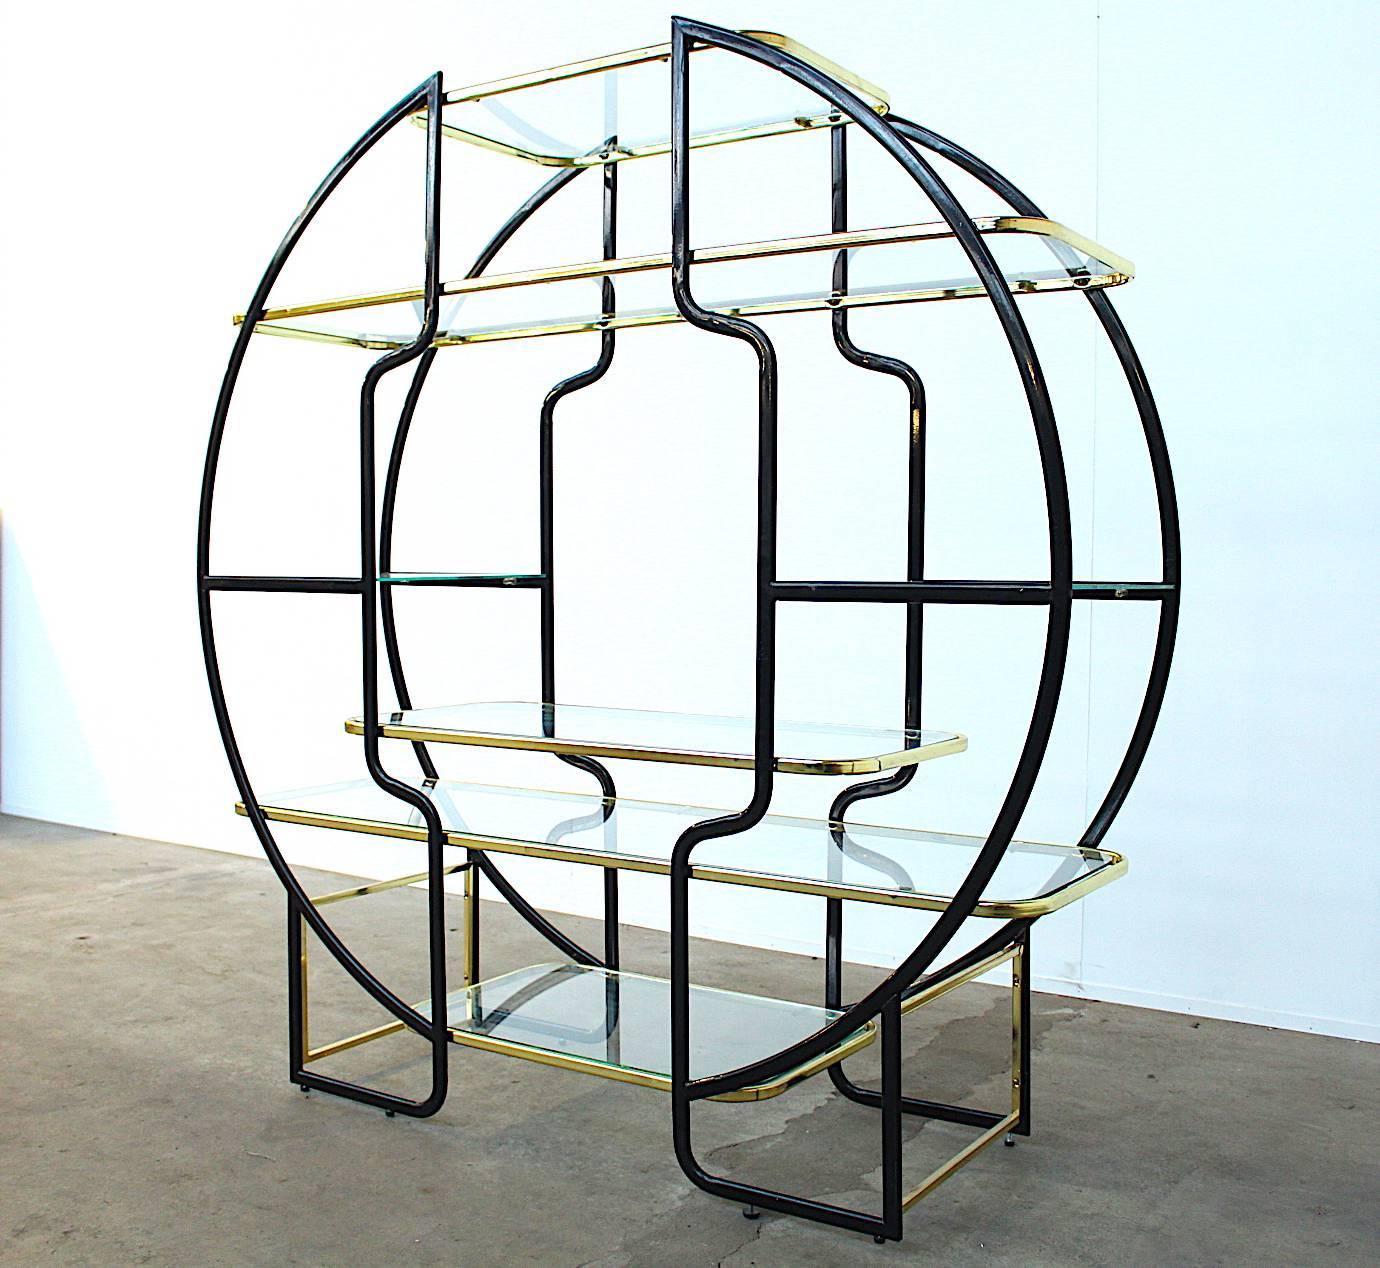 Beautiful Maison Jansen style round étagère or vitrine with seven tempered glass shelves in a frame of brass and black lacquered metal. Highly decorative and imposingly large piece; a very impressive eyecatcher in any interior. The piece is fitted